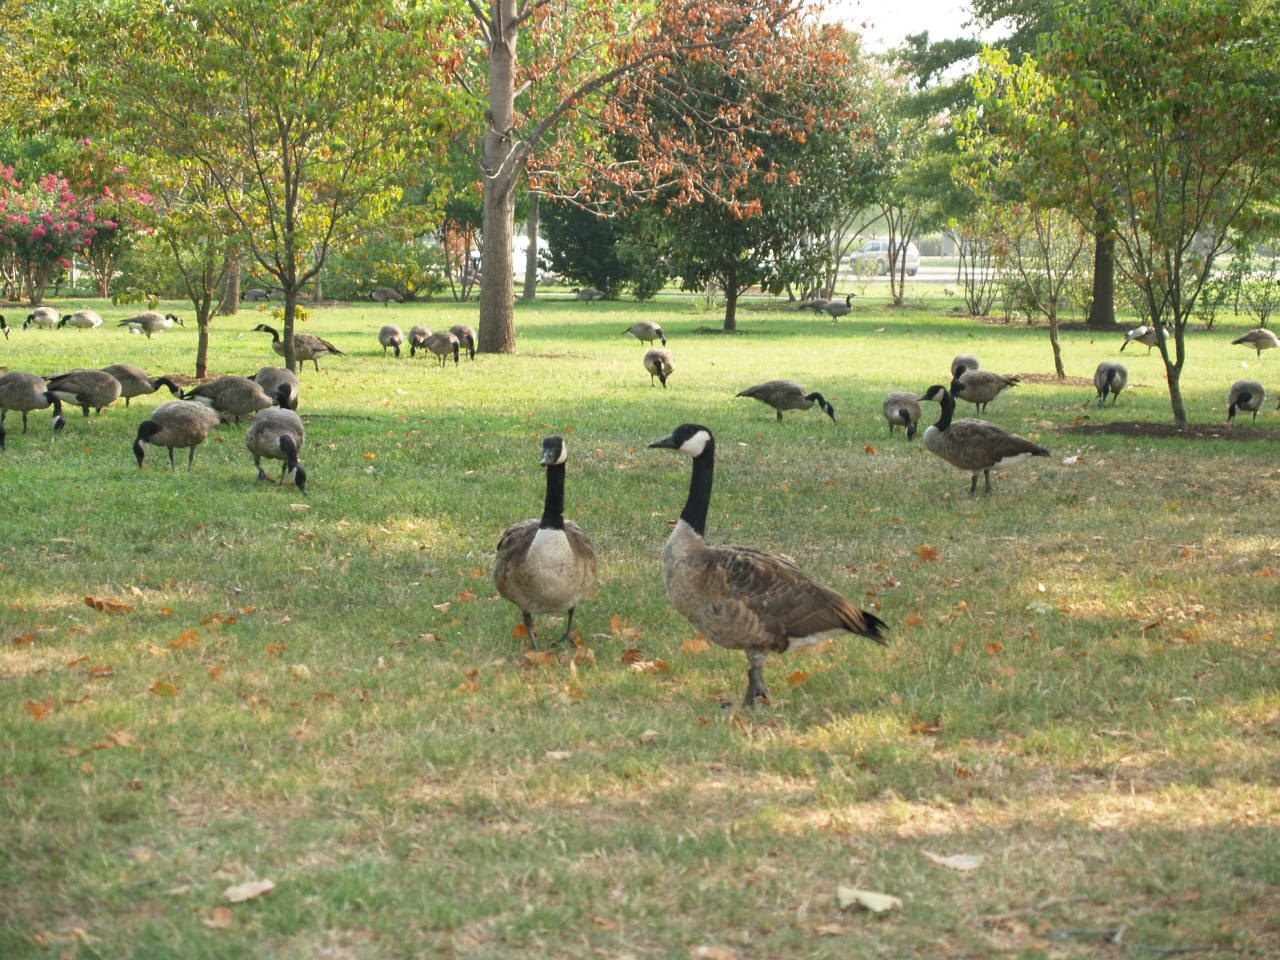 [Geese+and+More+Geese.JPG]